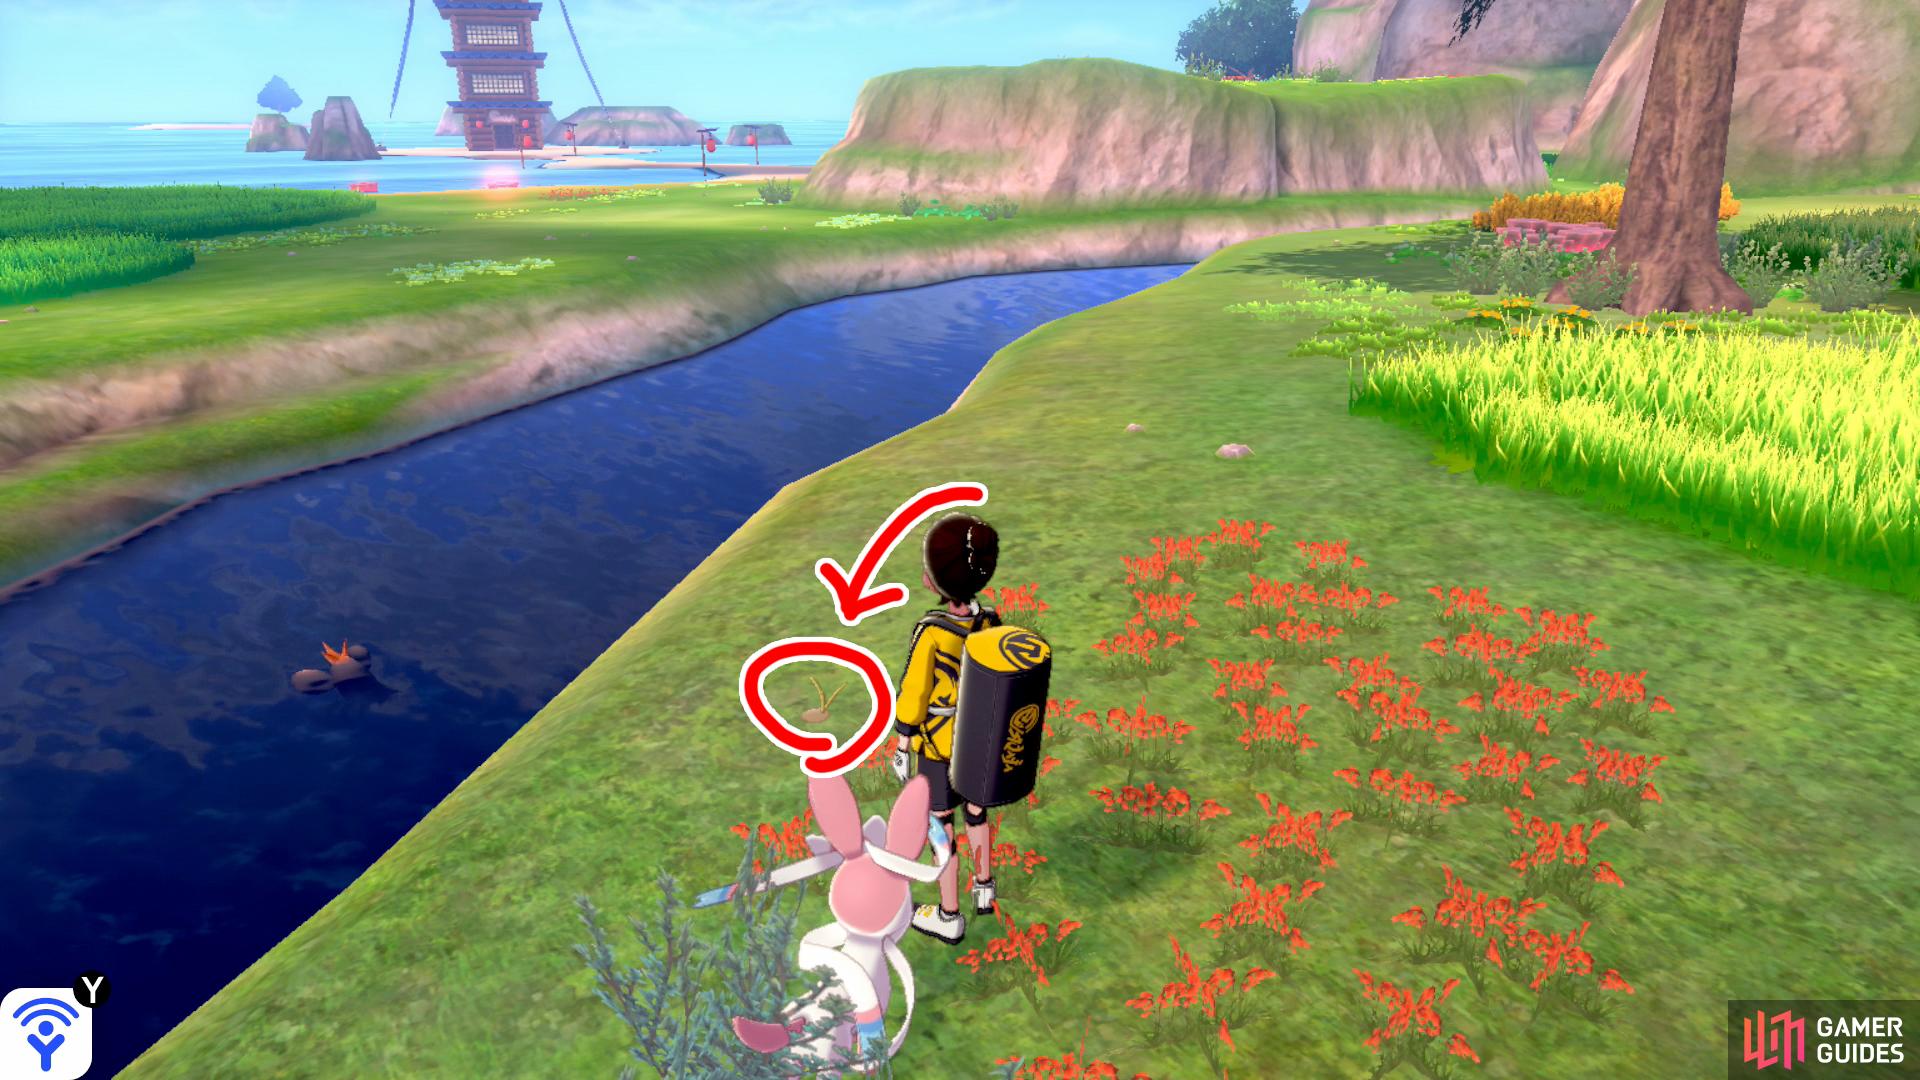 13/20: From Diglett 12, face the direction of the Forest of Focus (the cave should be behind you). Along the left side, there's low-lying land by the river. Walk past this section and search the red flowerbeds near the river.